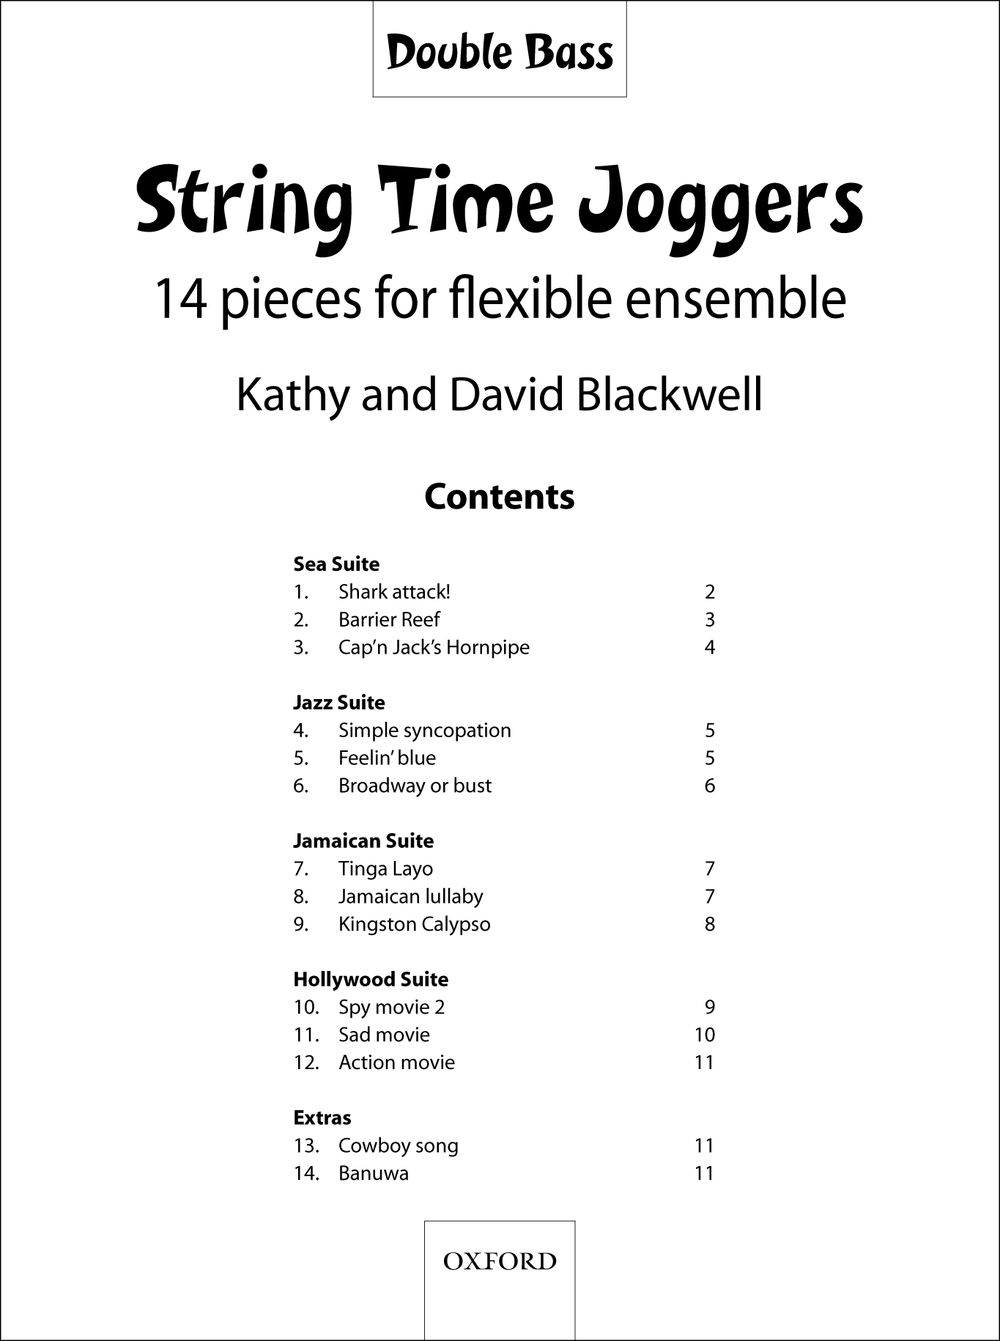 Blackwell: String Time Joggers: Double Bass: Part